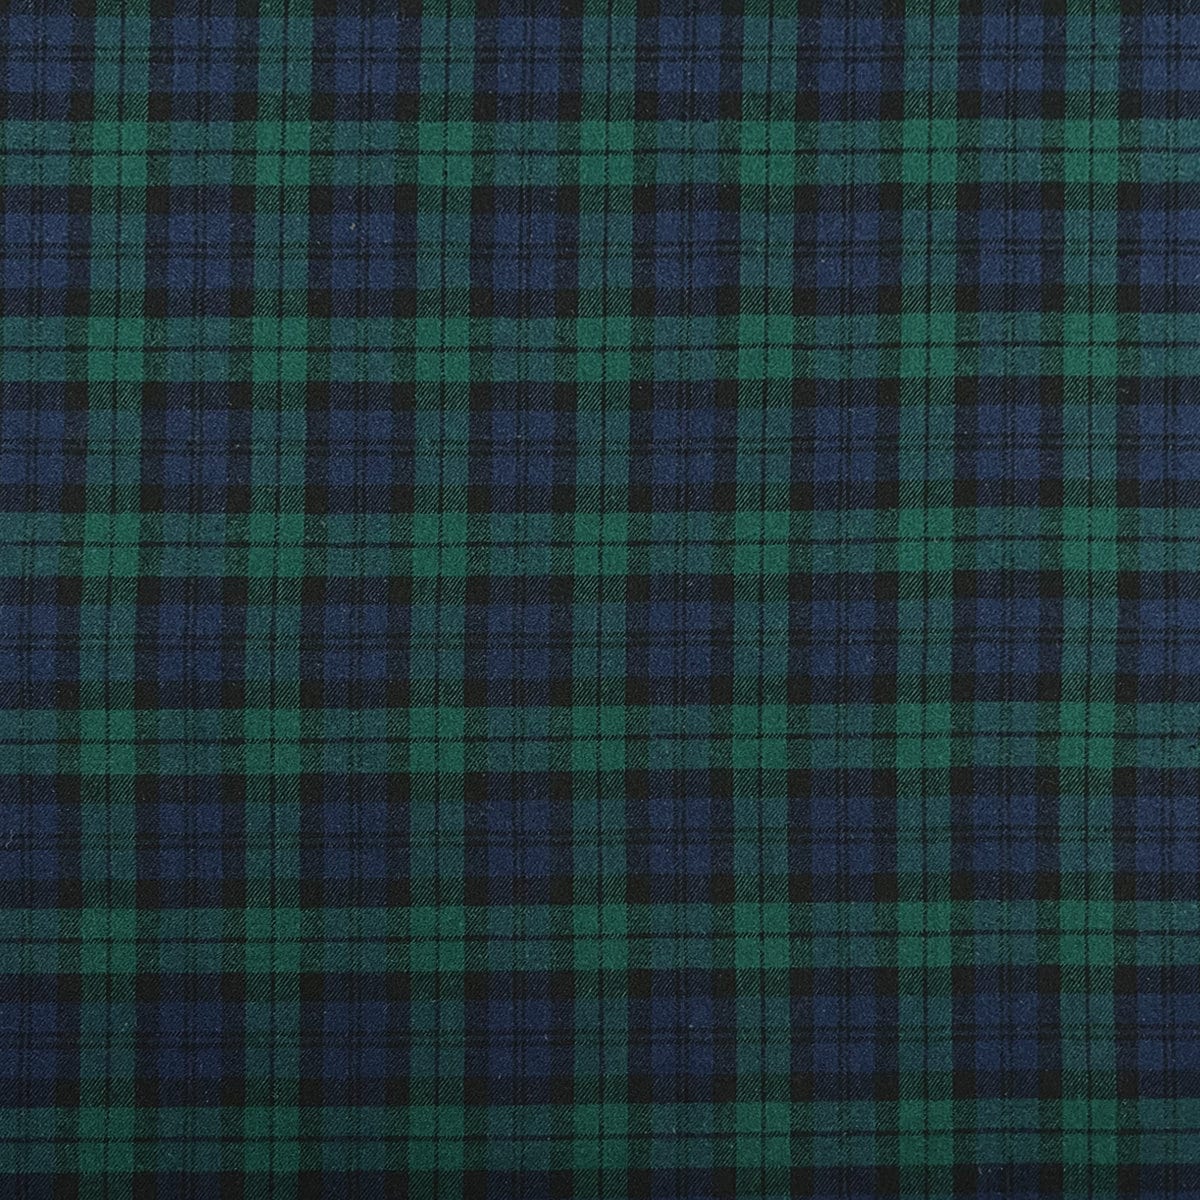 100% Cotton Tartan Plaid Flannel Fabric - Sold by the Yard and Bolt - Ideal  for Shirts, Scarves, Pajamas & Blankets